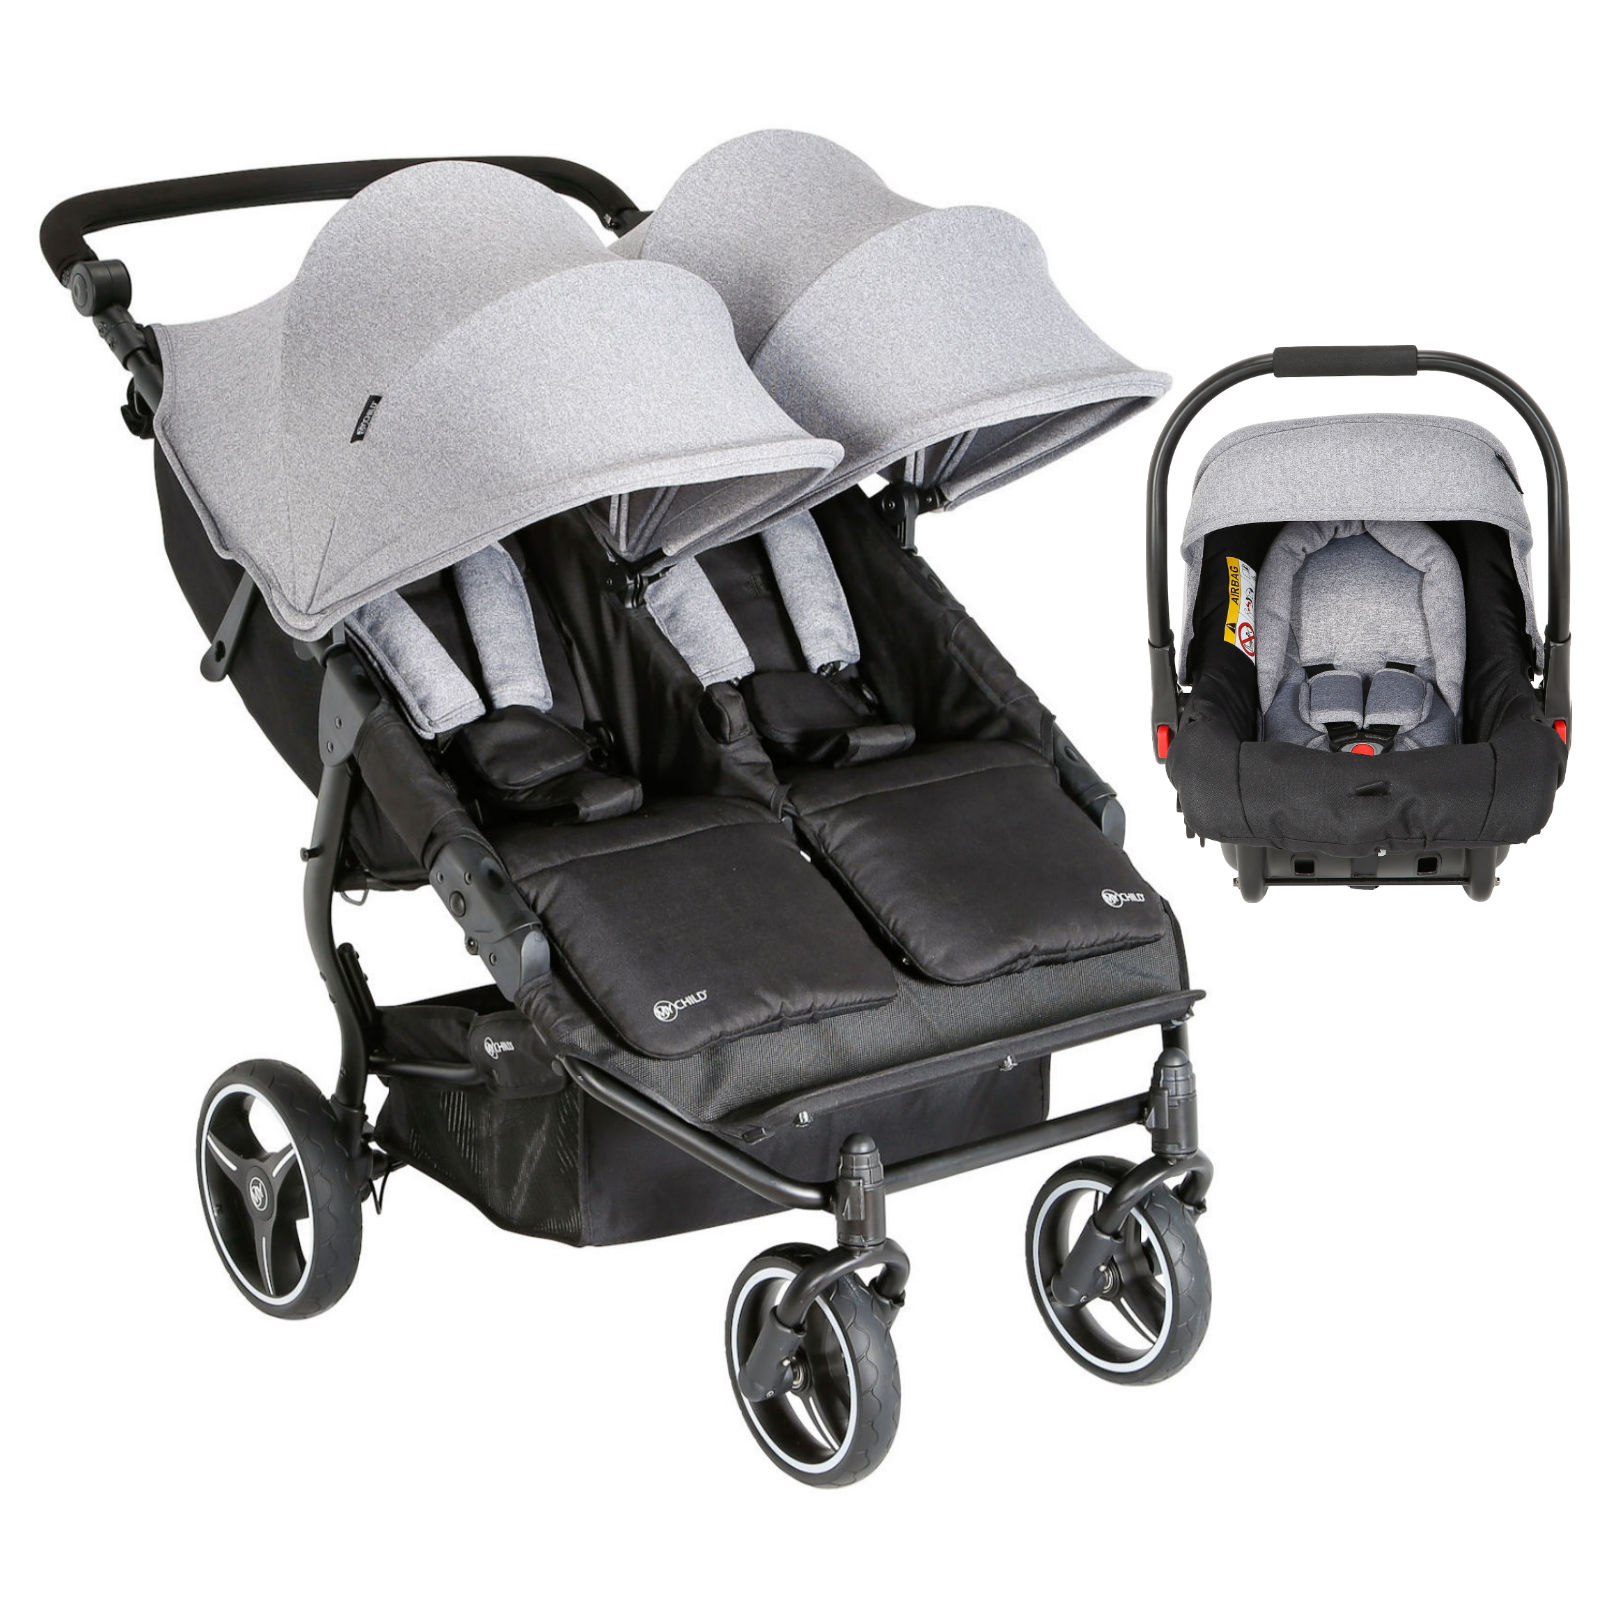 double stroller with car seat included